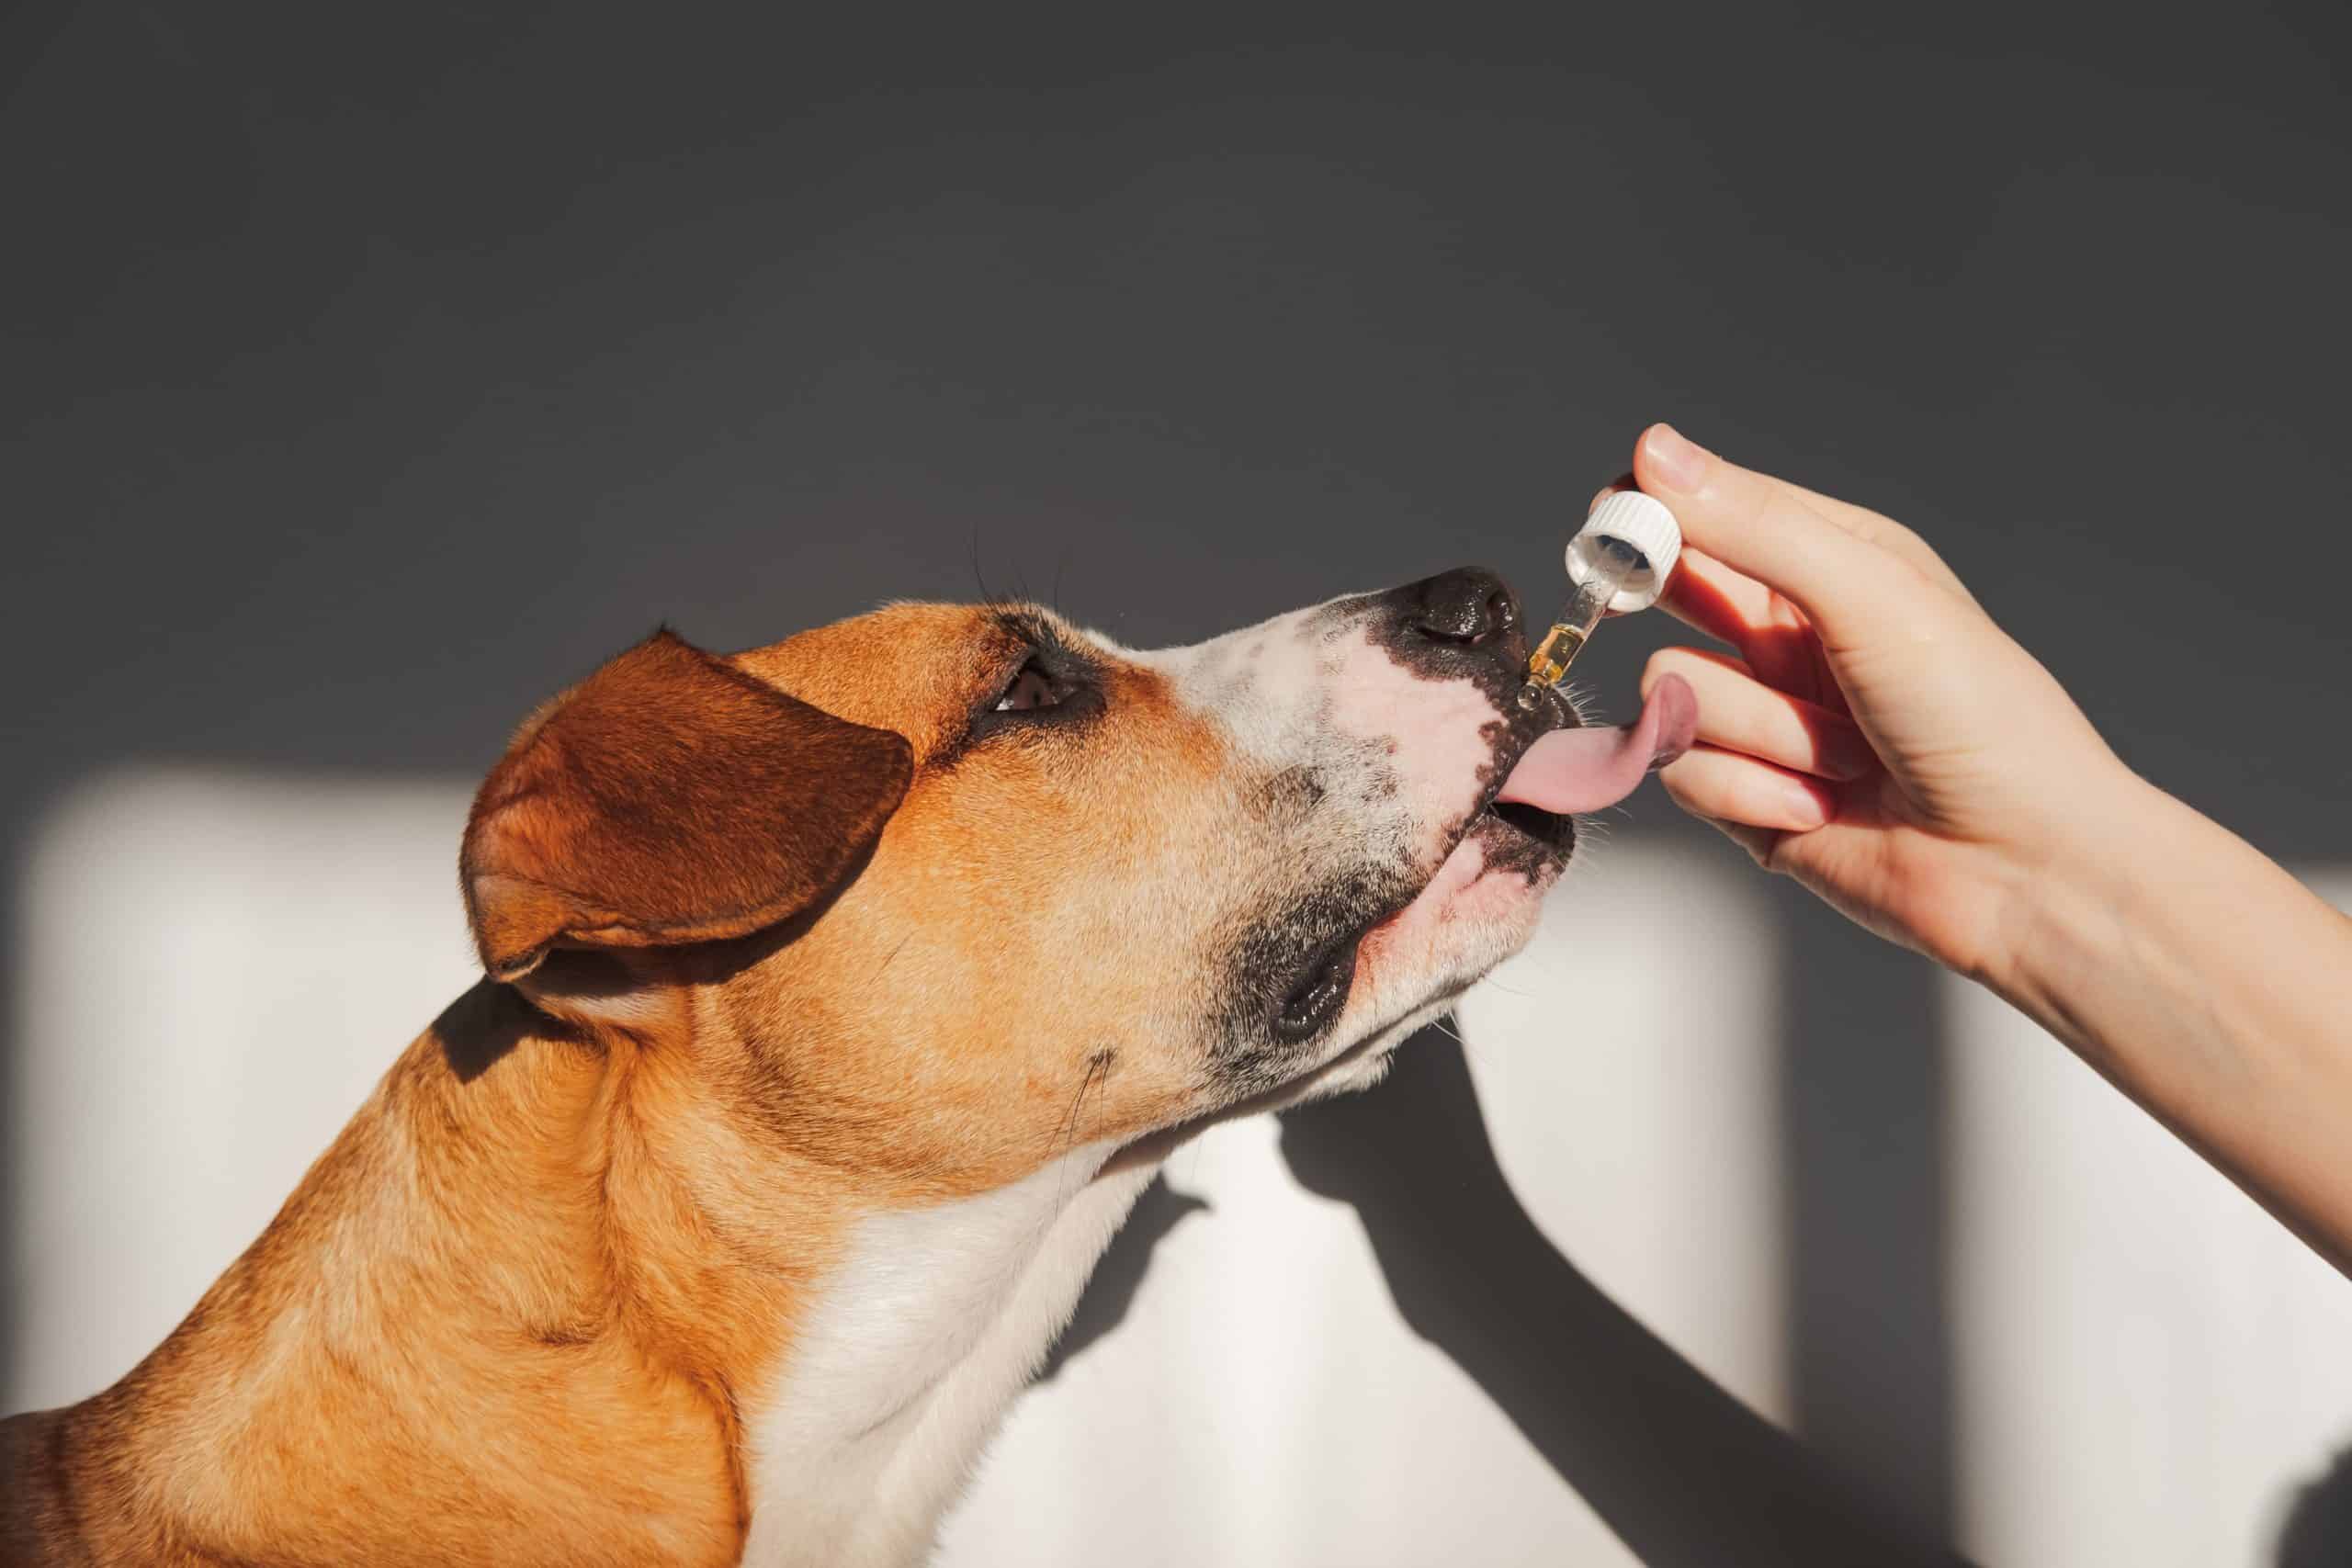 Owner gives Boxer CBD oil. CBD products such as oils and treats could help address arthritis pain and even help lower anxiety in dogs.